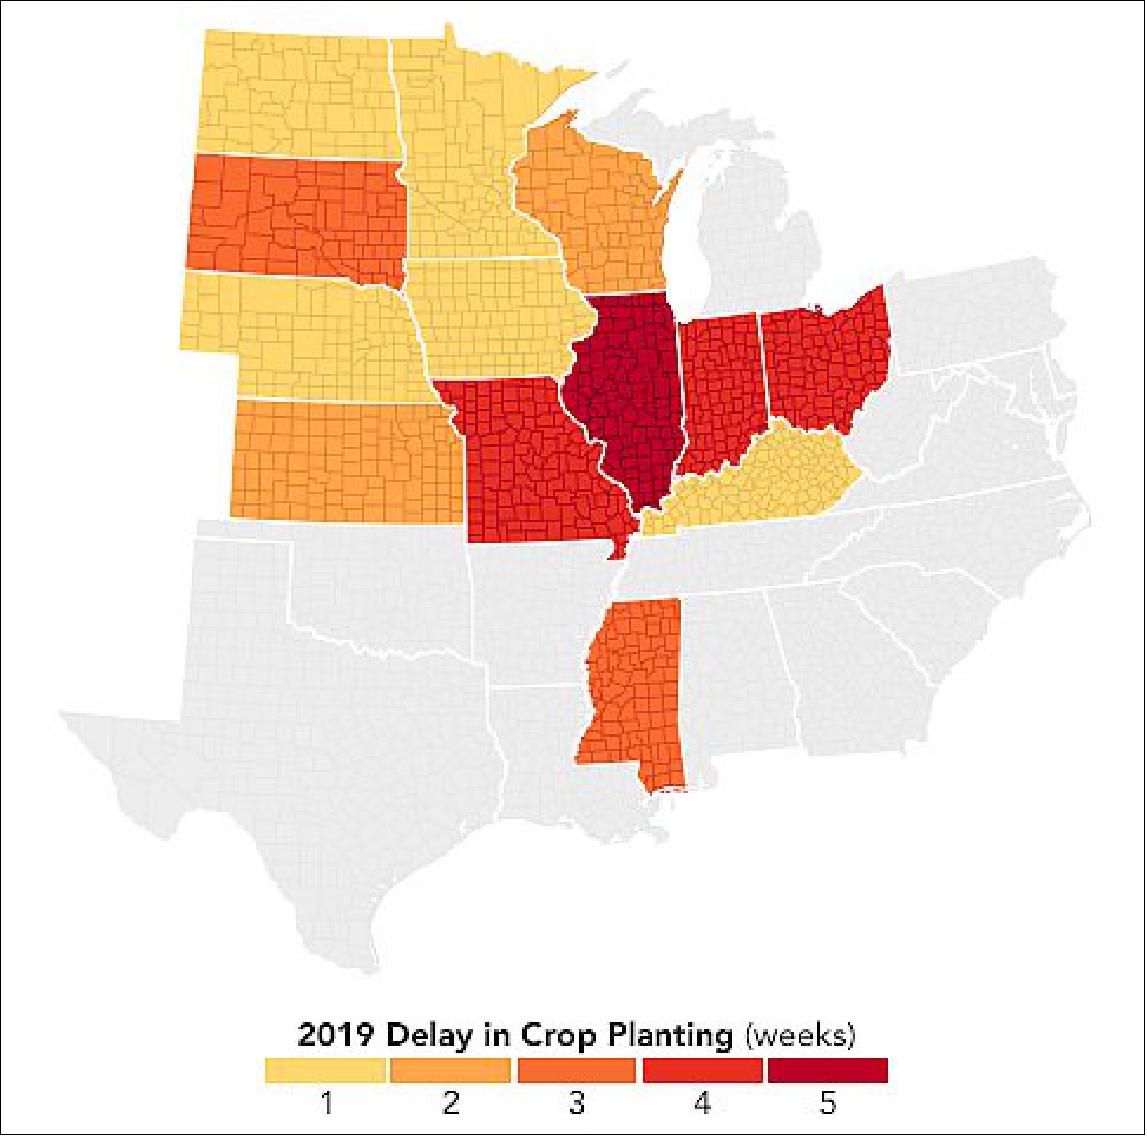 Figure 14: The 2019 maps tell a different story. By the end of April 2019, the U.S. had experienced its wettest 12-month period on record. The Midwest was hit particularly hard, with saturated soils and widespread flooding across the Mississippi and Missouri river watersheds. The conditions caused farmers to delay planting by a few weeks in most states and up to five weeks in Illinois. As a result, fluorescence that year was weaker than usual in June and July, when croplands were much less productive. August and September showed higher-than-usual fluorescence, indicating an extended growing season. But the 2019 season as a whole was still not as productive as 2018 (image credit: NASA Earth Observatory)